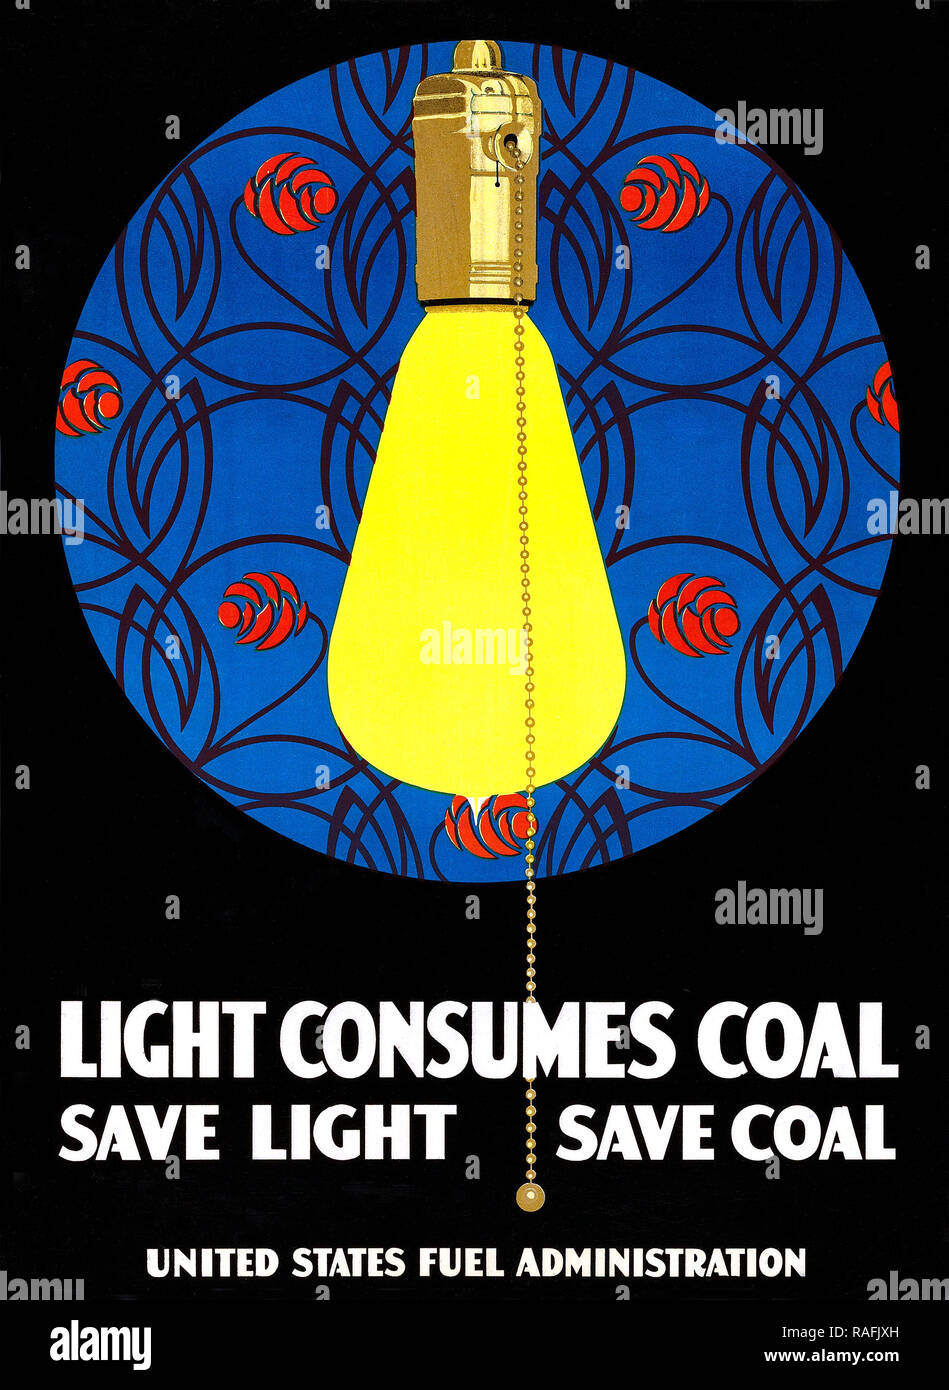 Light Consumes Coal advertising poster Stock Photo